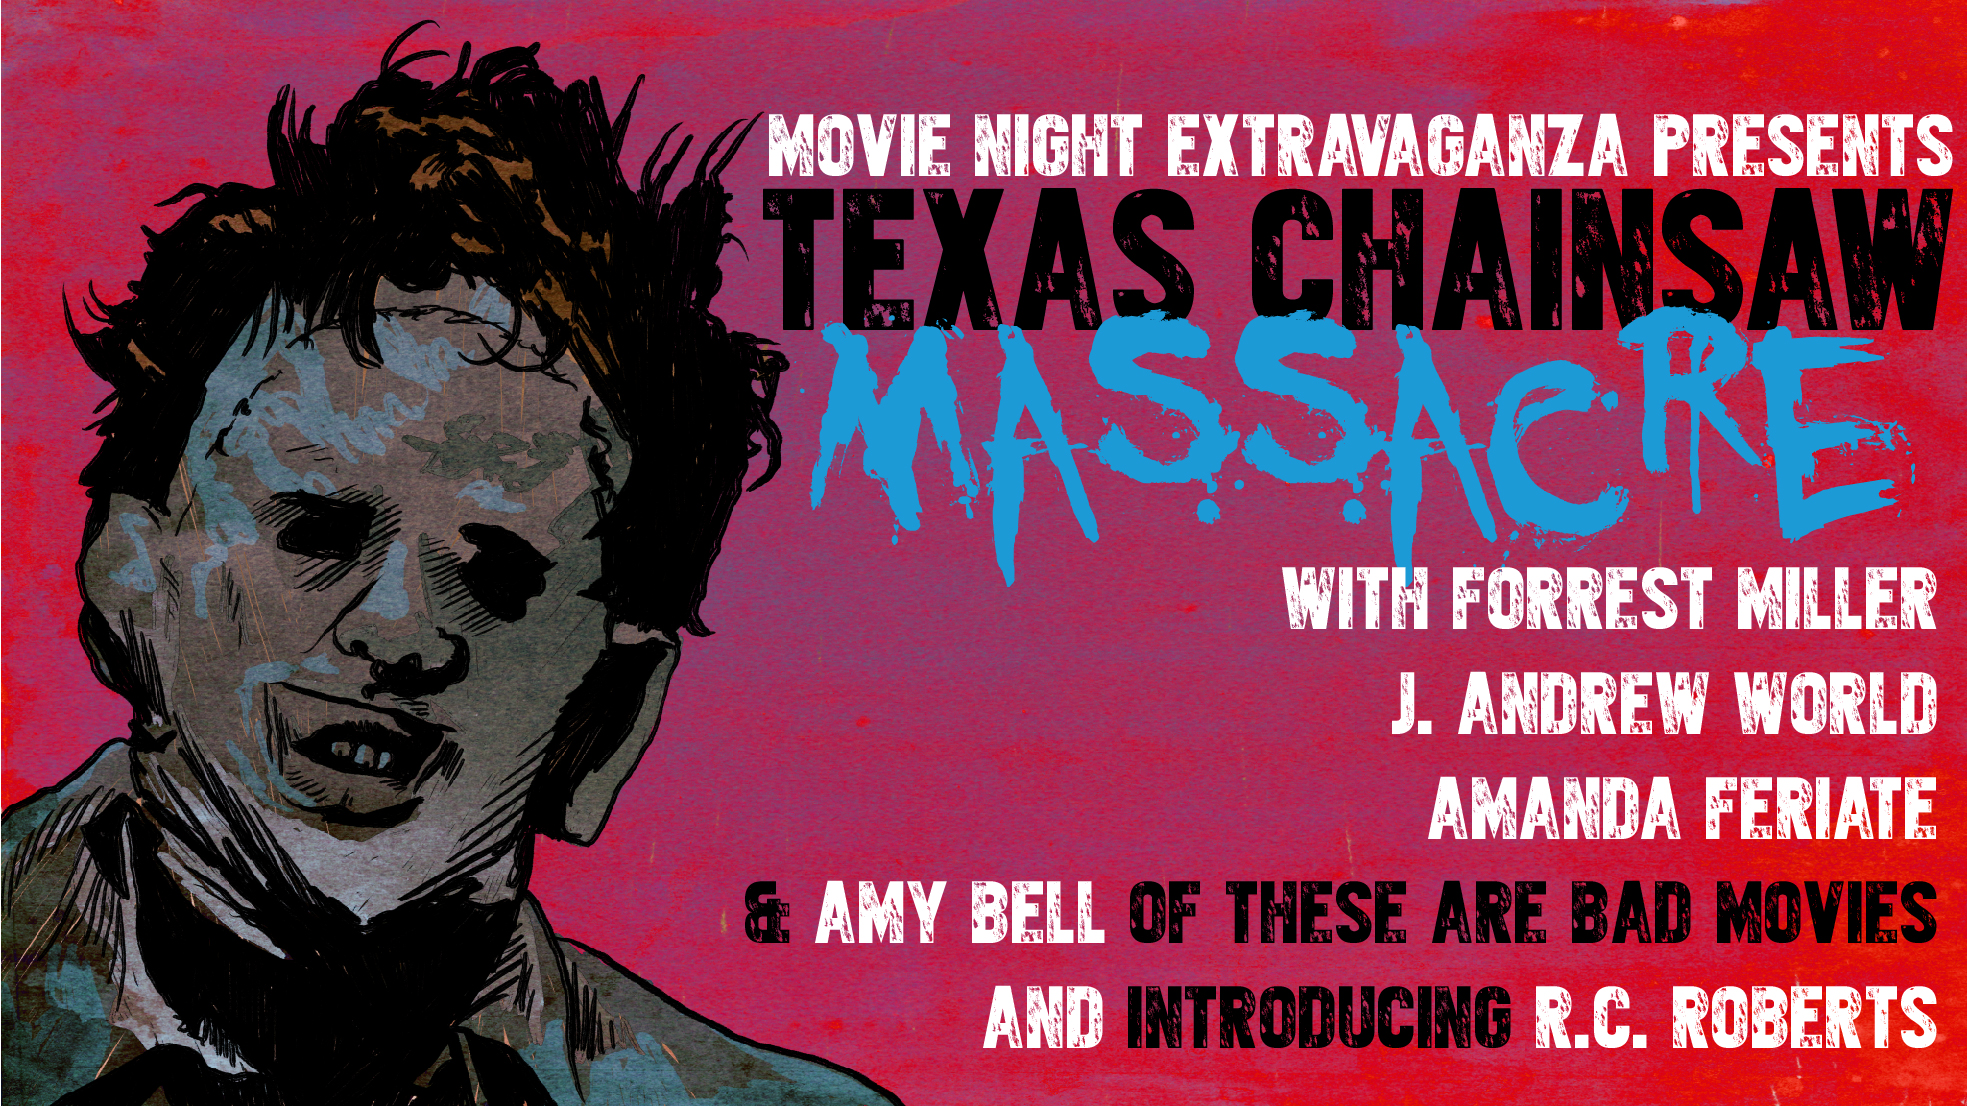 Episode 28: These Are Bad Chainsaws (Texas Chainsaw Massacre)